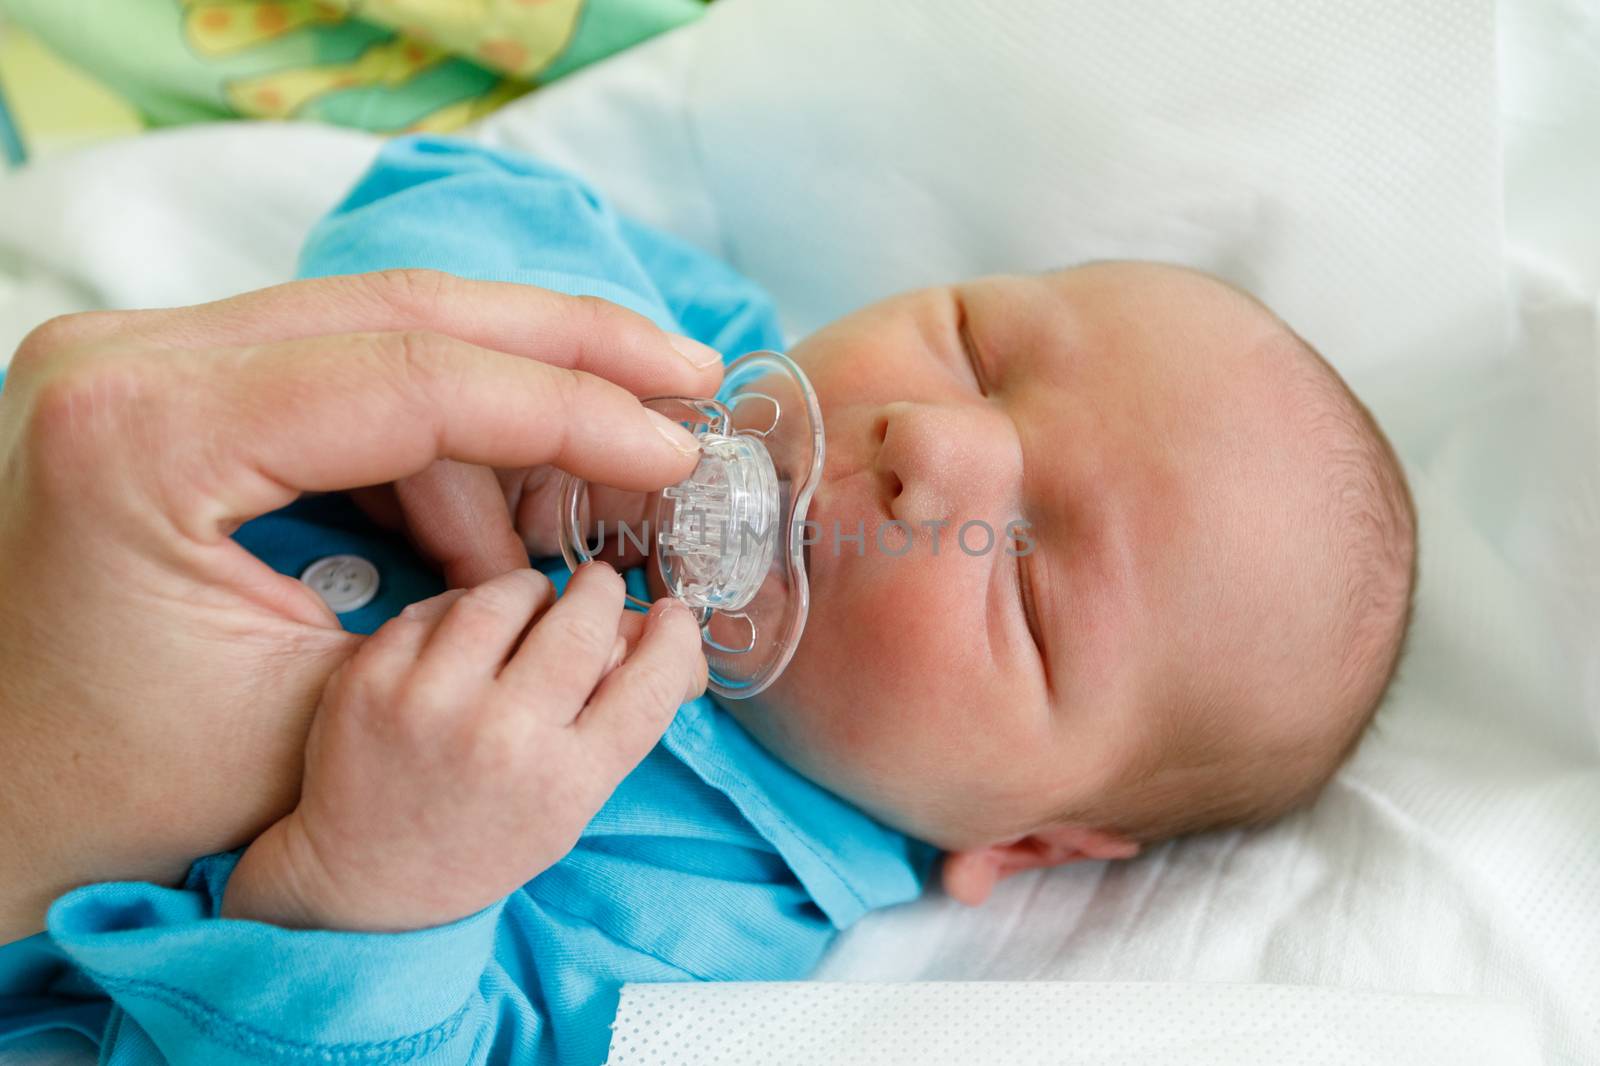 newborn baby infant in the hospital, the first hours of the new life, one days after birth